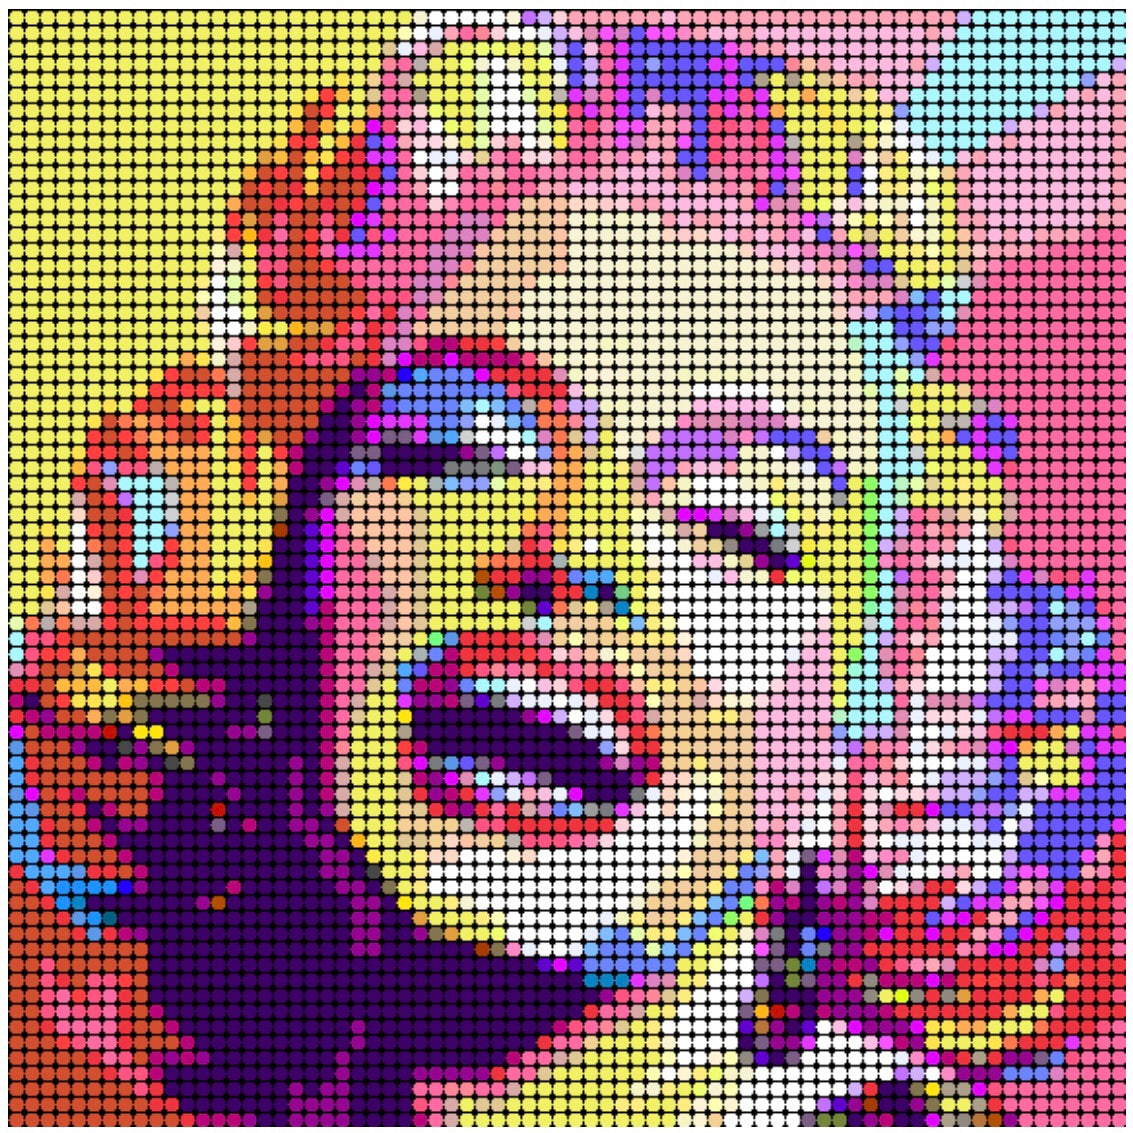 Colorful Marilyn Monroe Sequin Pixel Wall Art by Pix Perfect